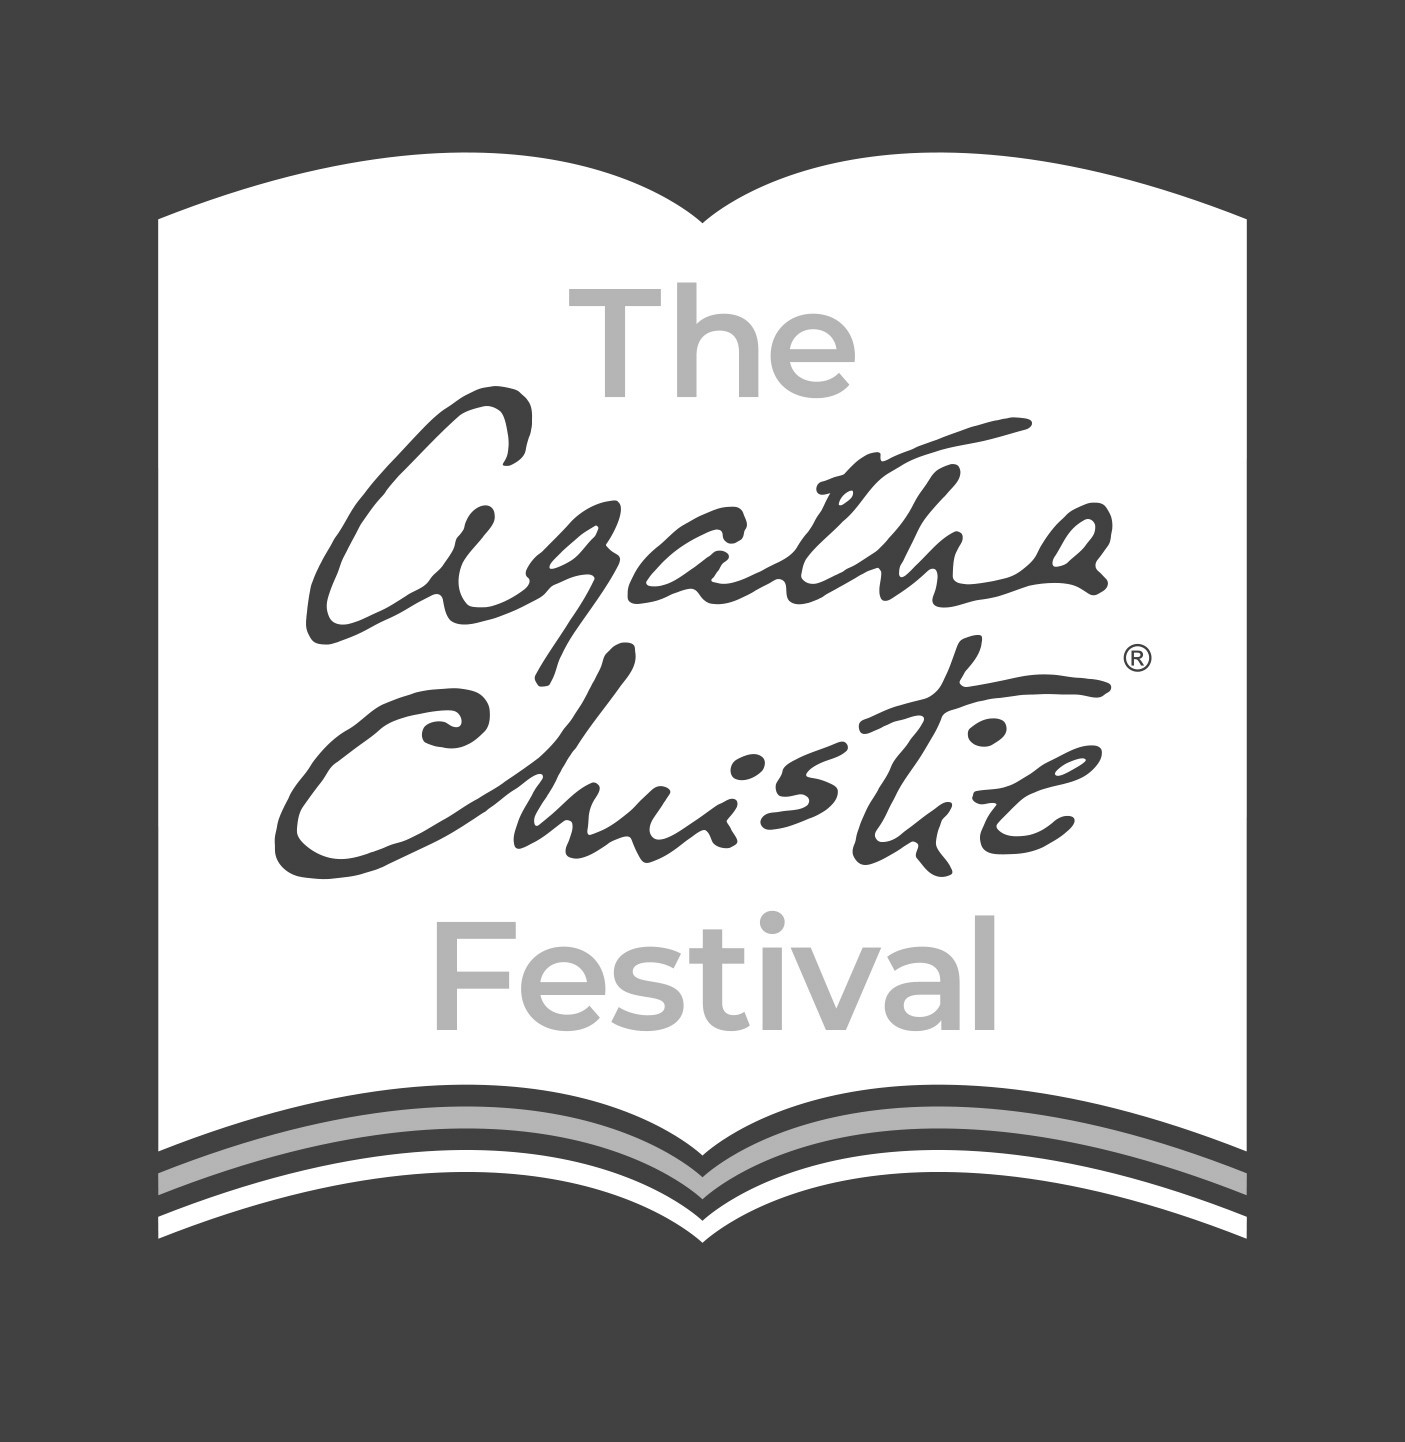 Statement From Agatha Christie Festival Ltd On The Passing Of Her Majesty The Queen